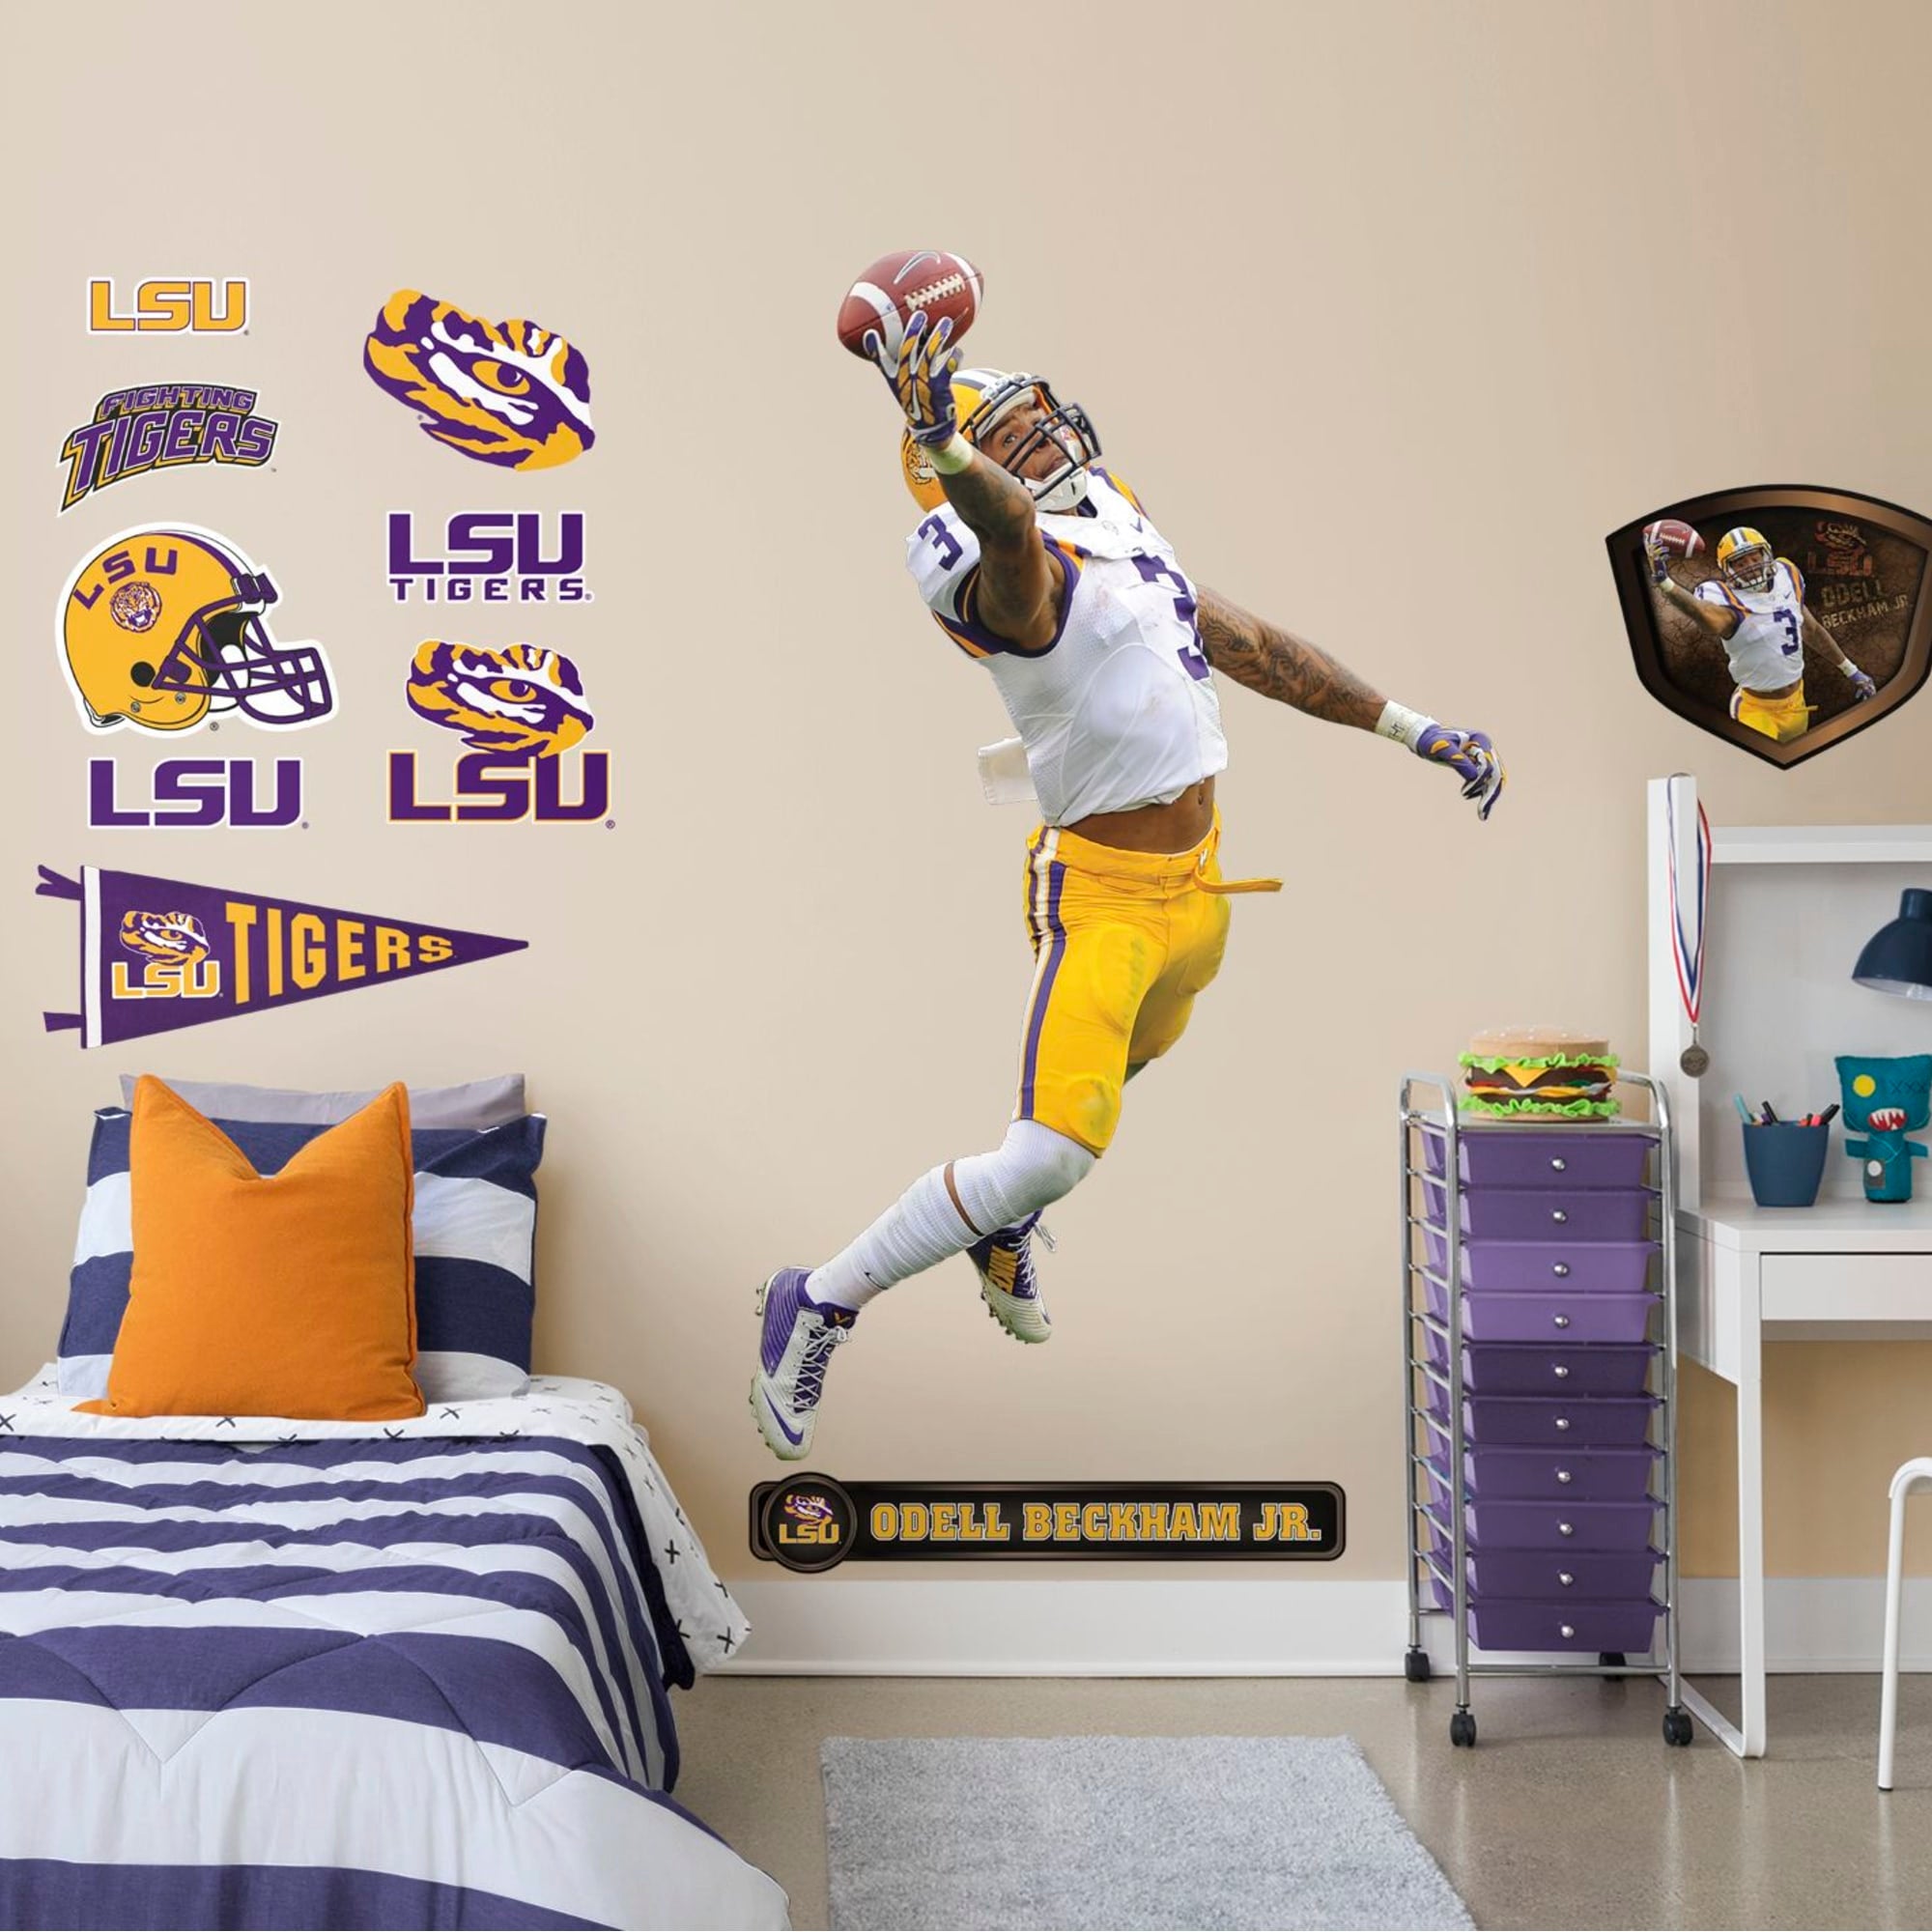 Odell Beckham Jr. for LSU Tigers: LSU - Officially Licensed Removable Wall Decal Life-Size Athlete + 12 Decals (48"W x 76"H) by